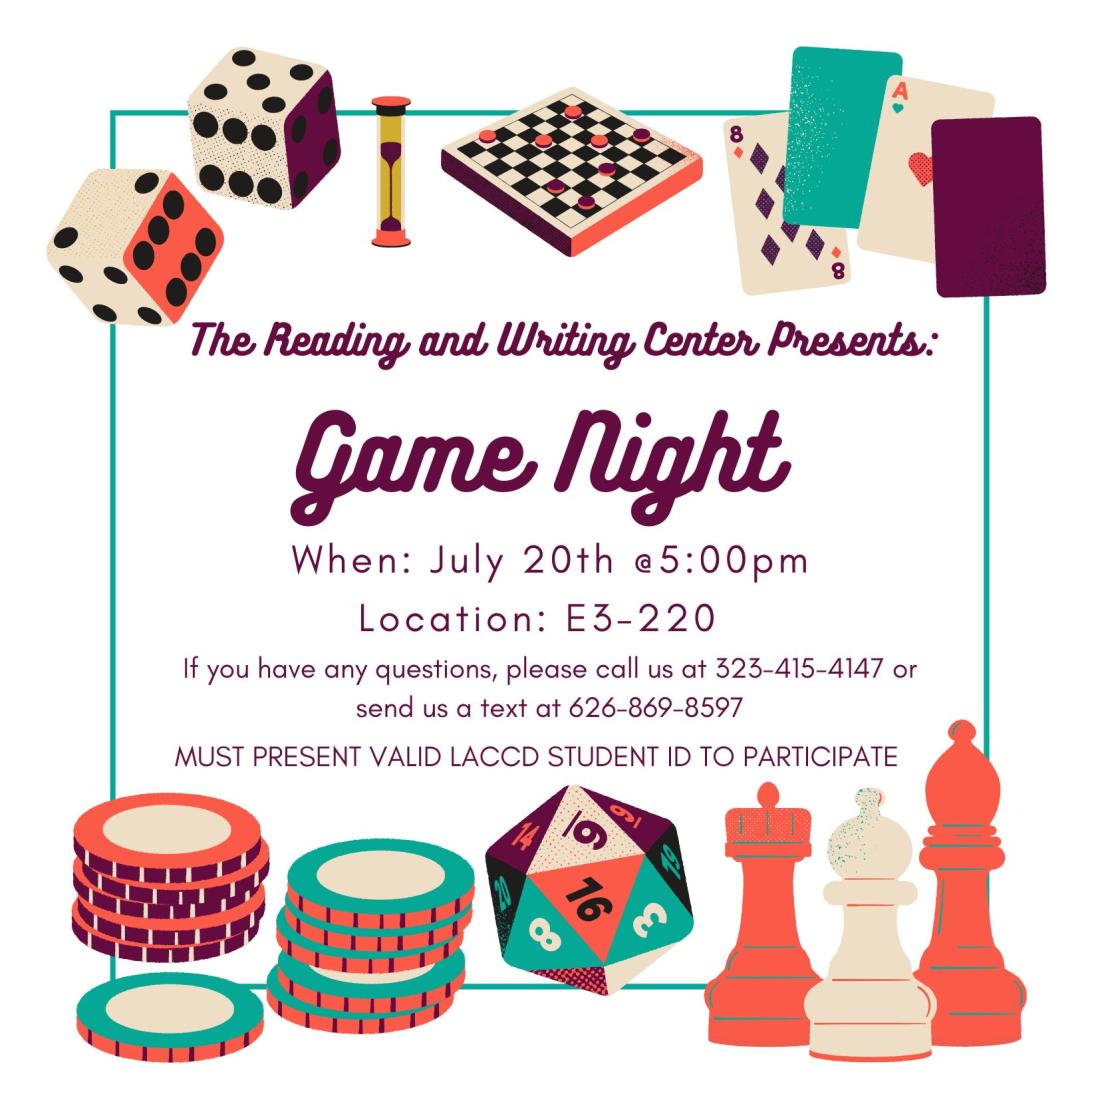 🎲 🌈 SAVE THE DATE: Join us for a free game night at The Center